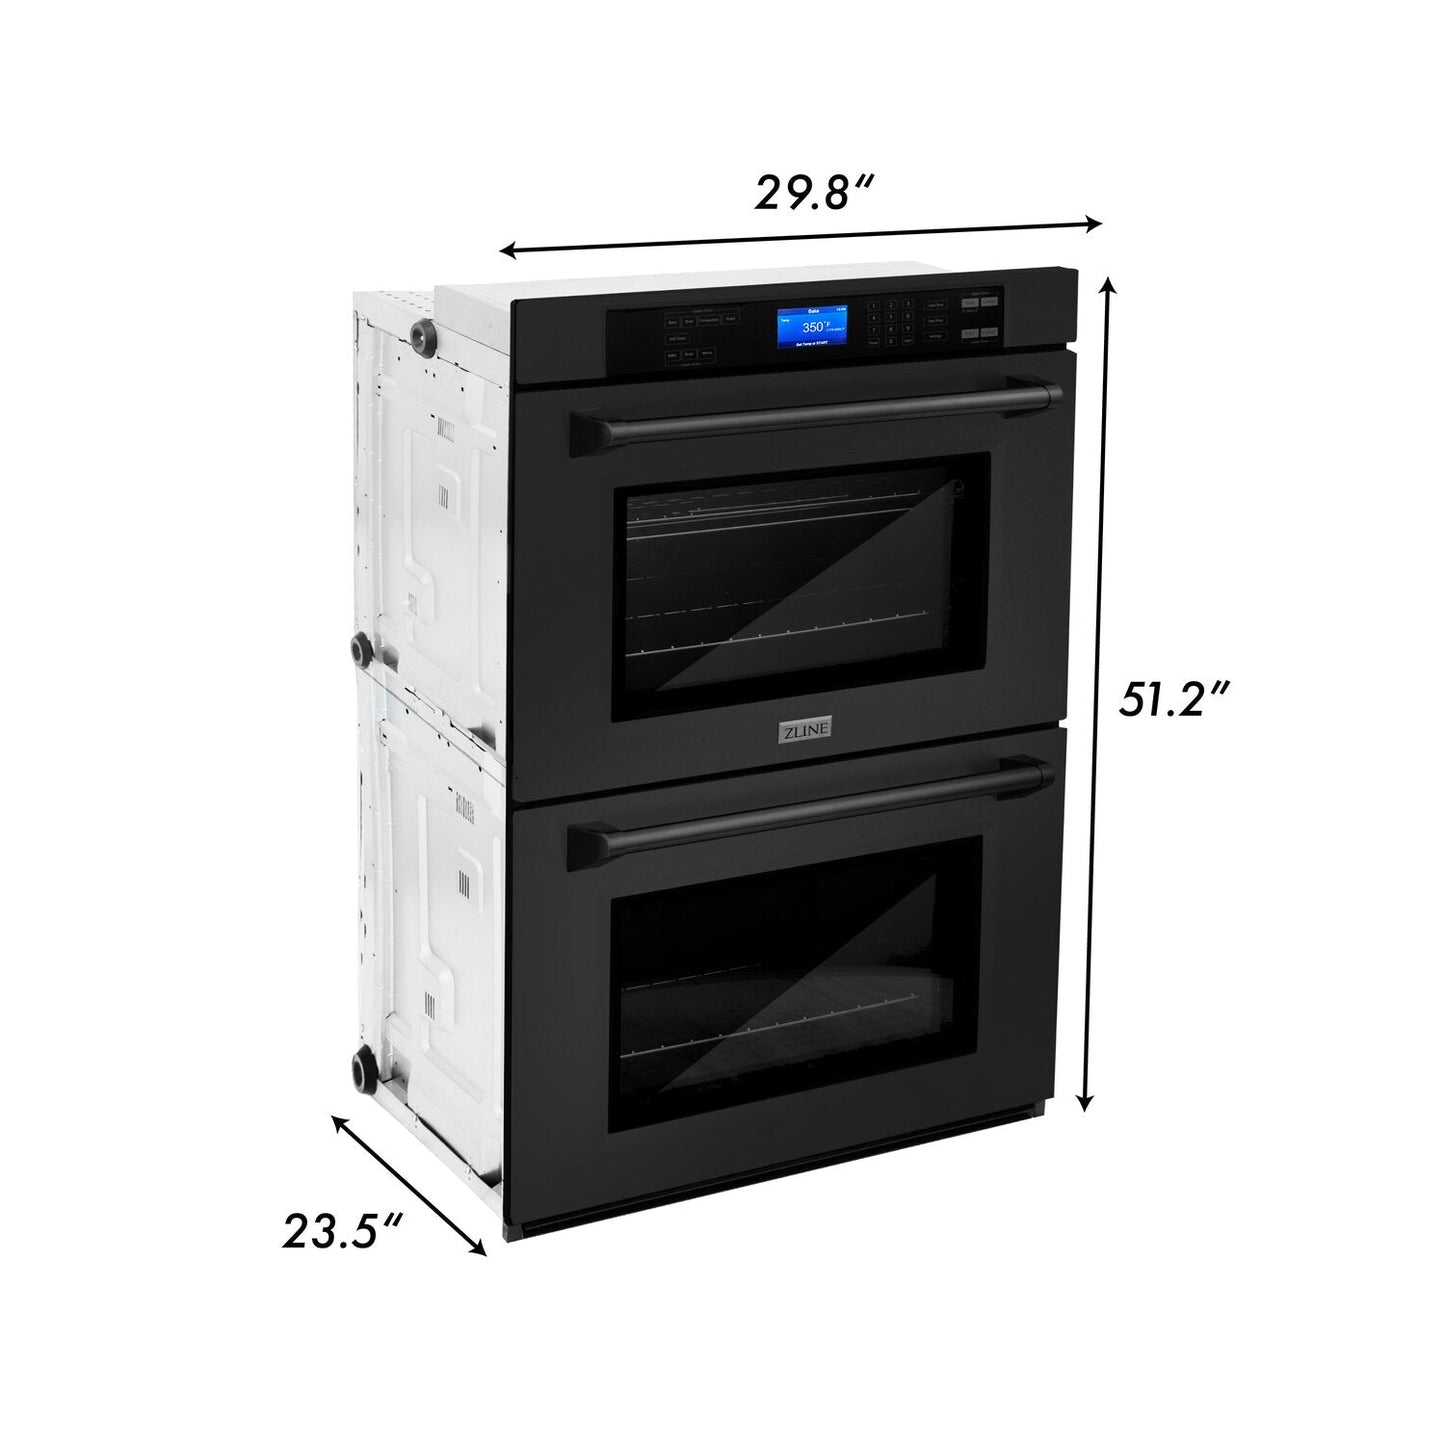 ZLINE Professional 30" Black Stainless Steel Electric Convection Double Wall Oven With Self Clean Technology